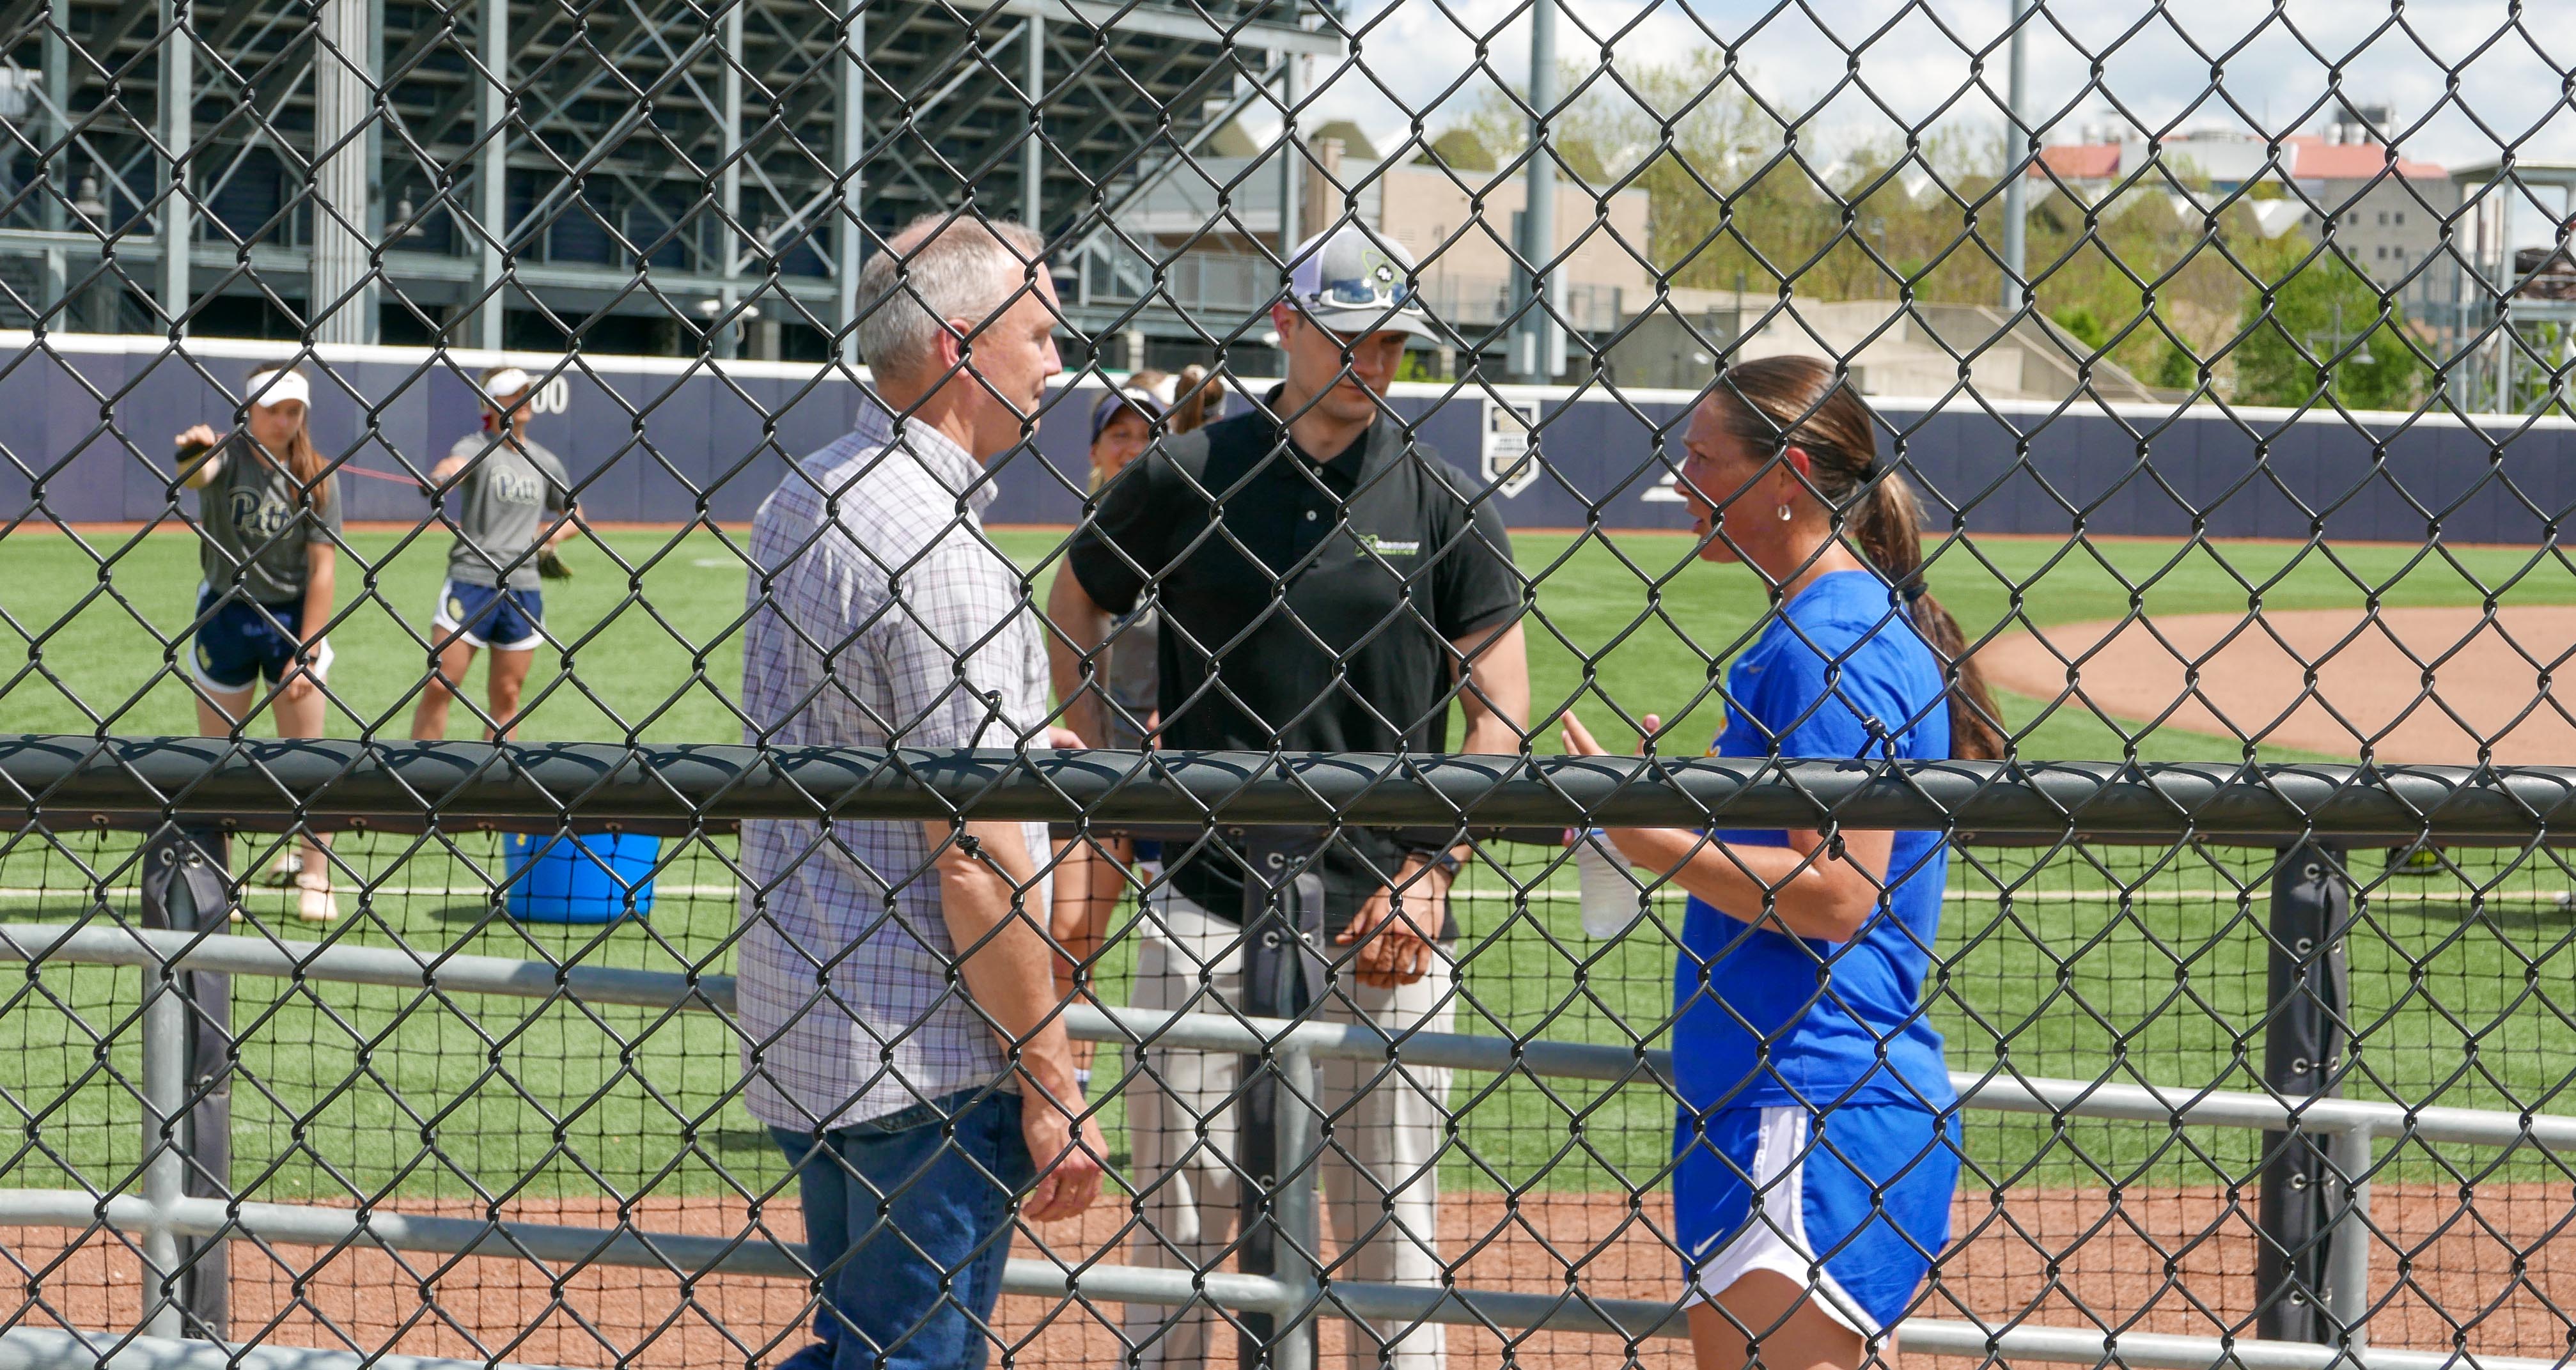 Clarks meeting with softball coach on field